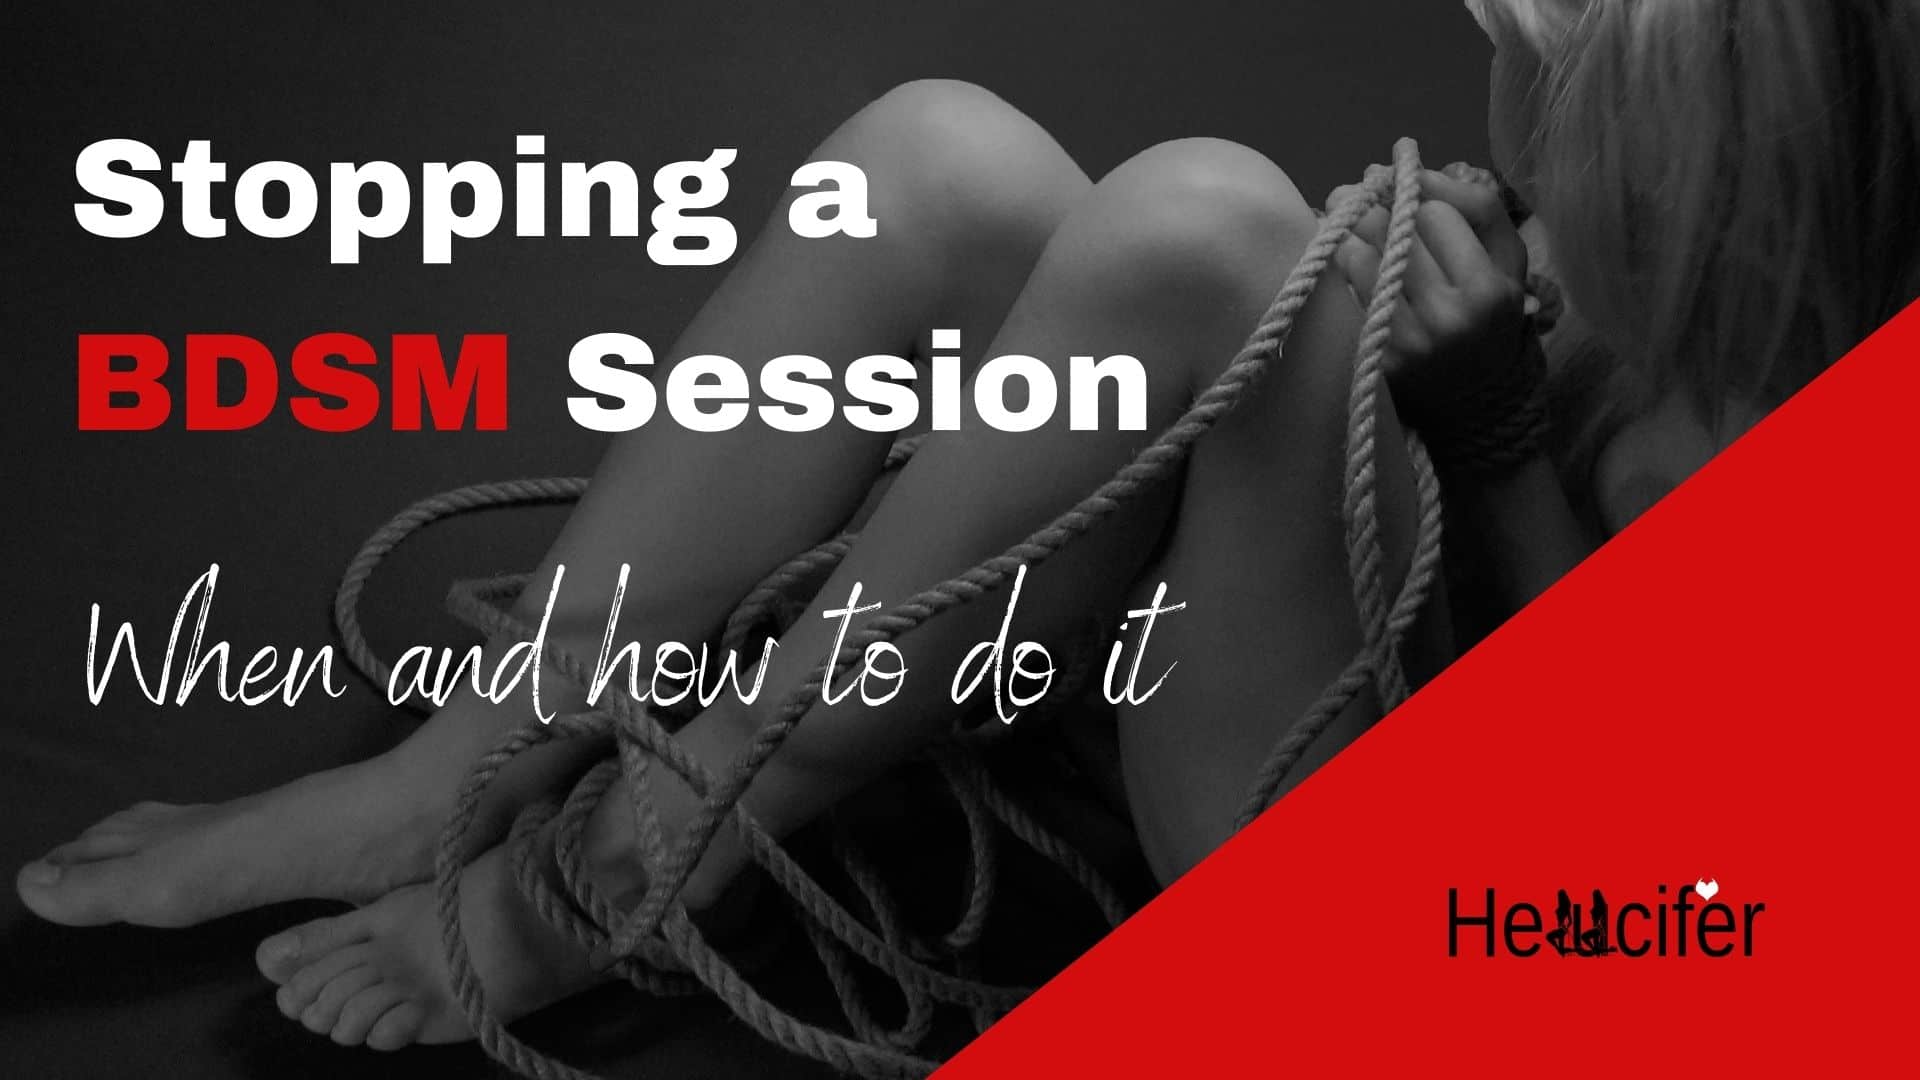 When to stop a BDSM session and how